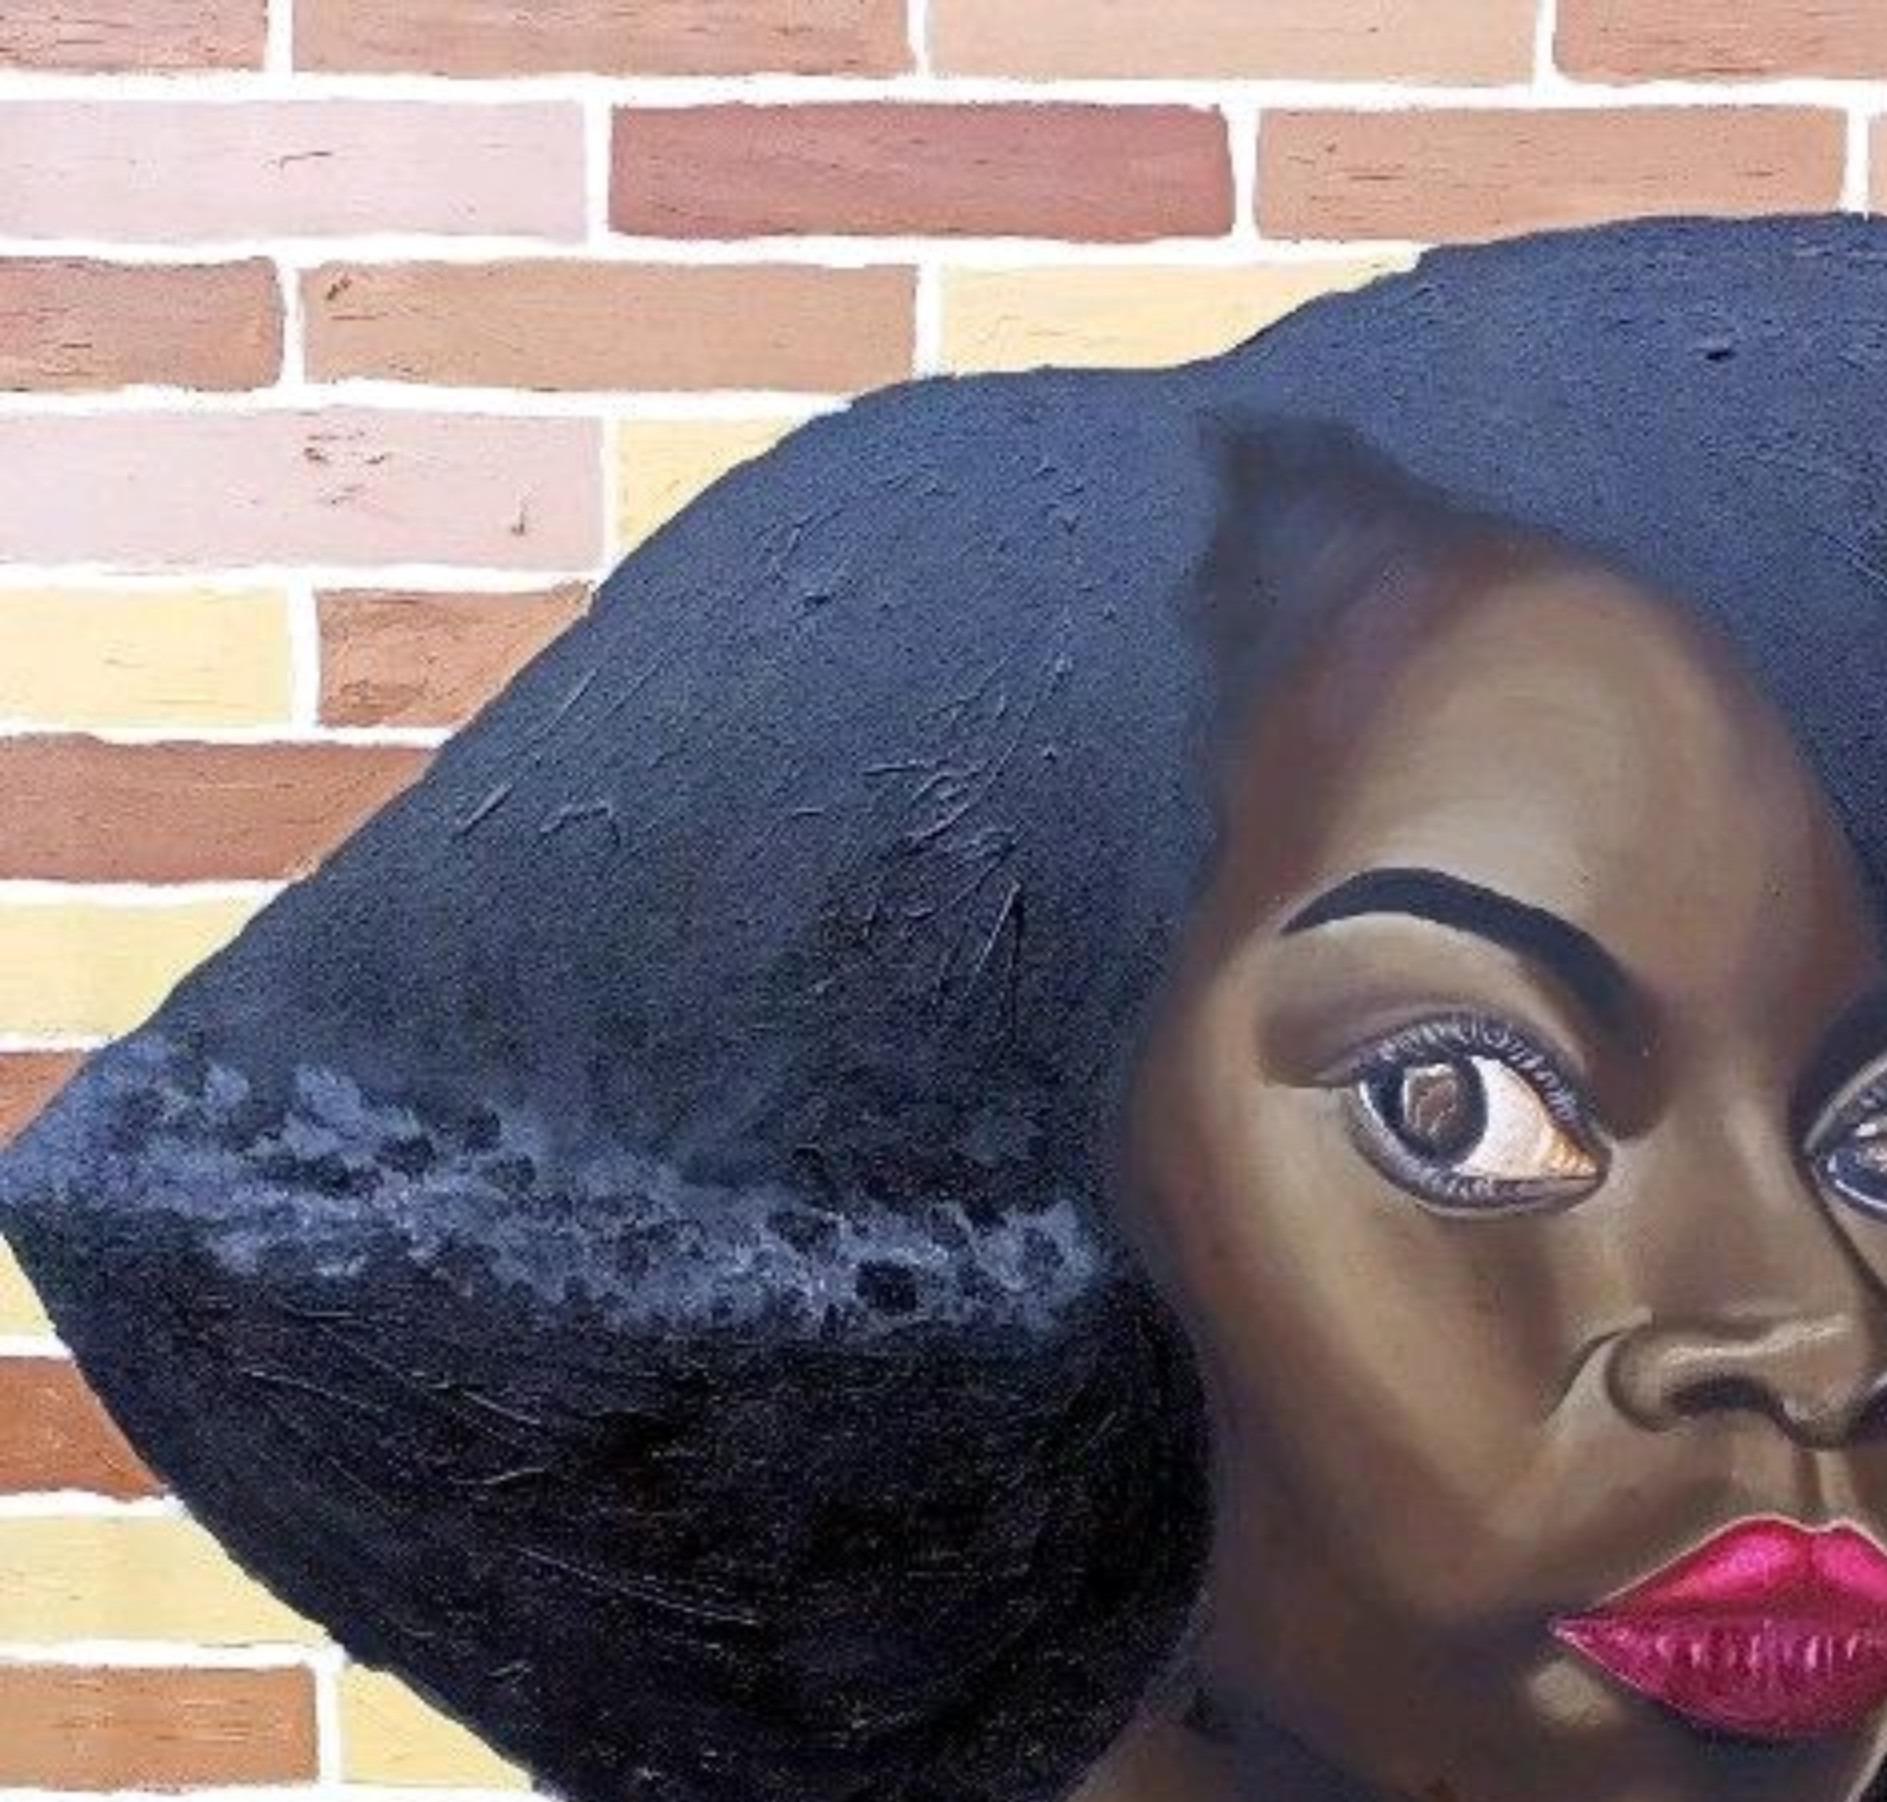 Look At My Hair, This is Who I Am - Painting by Olaosun Oluwapelumi